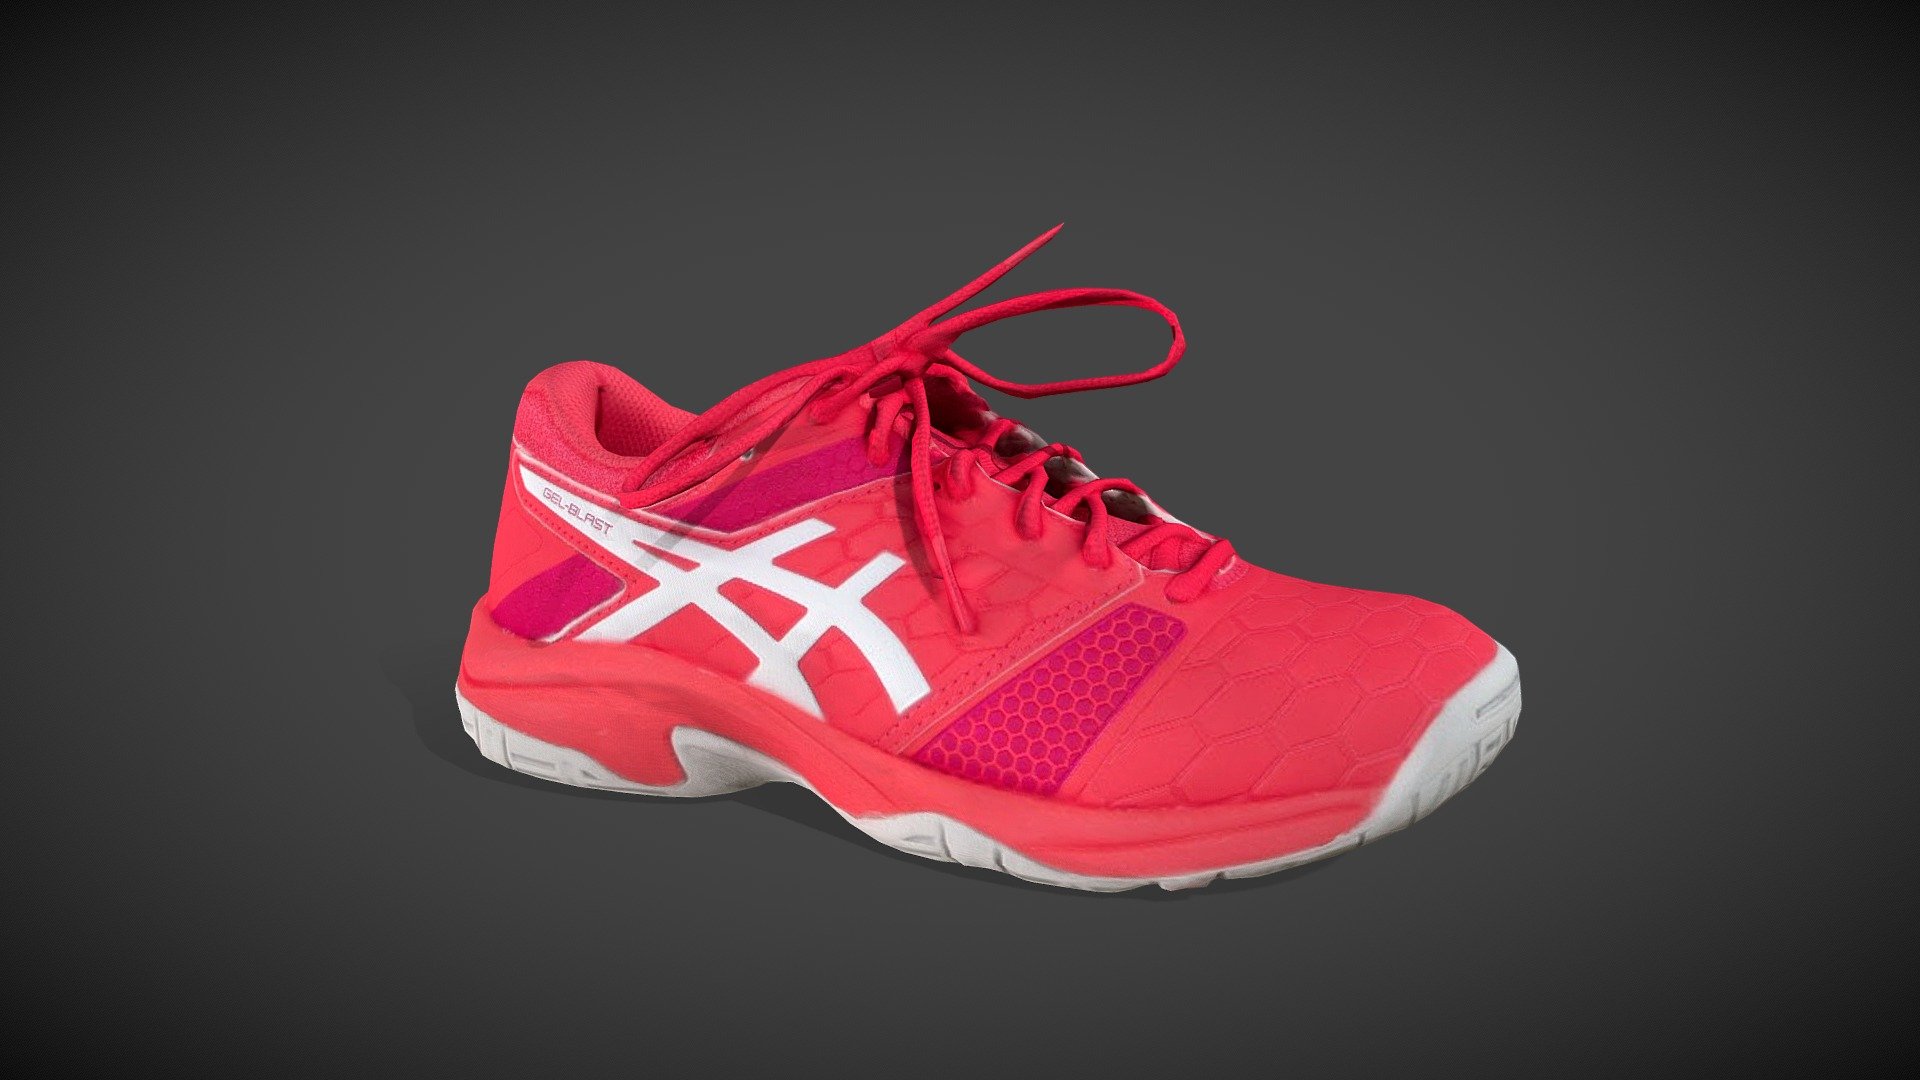 HIghly detailed Asics running shoe in vivid red color produced with photogrammetry and Blender. New optimized version with bump and normal maps.

Tested in Unreal Engine and Unity 3d model